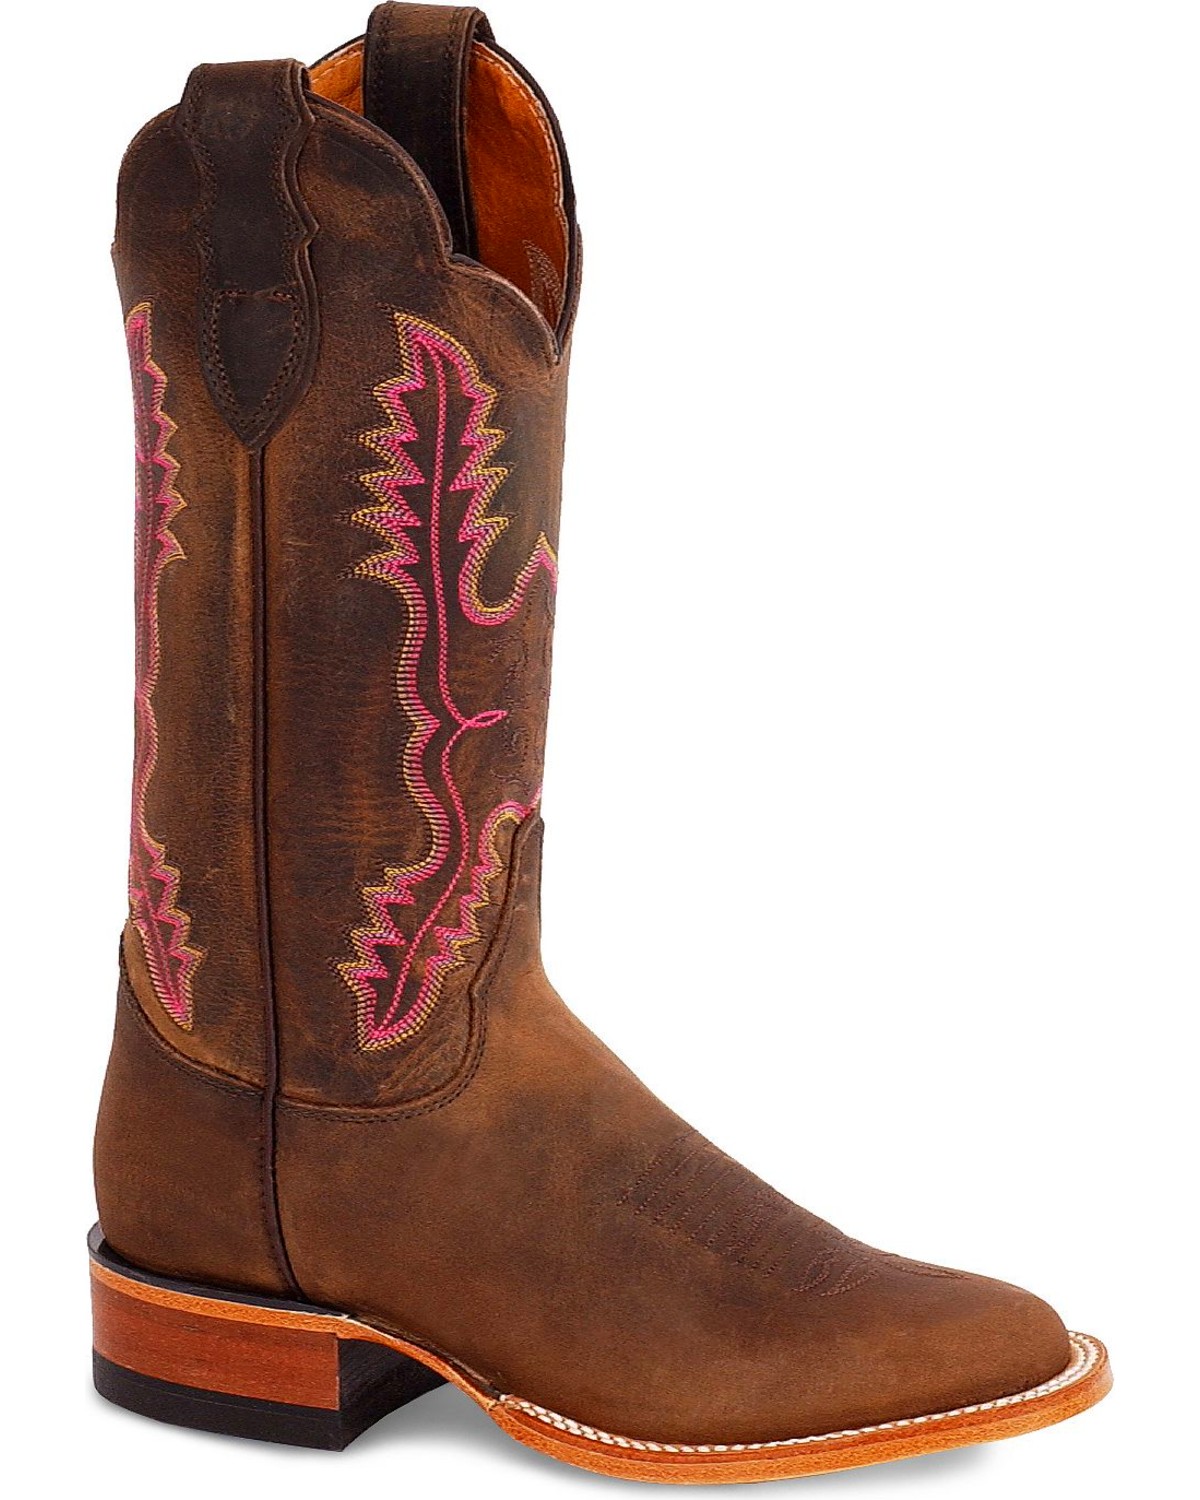 Justin Women's Distressed Leather Cowboy Boots